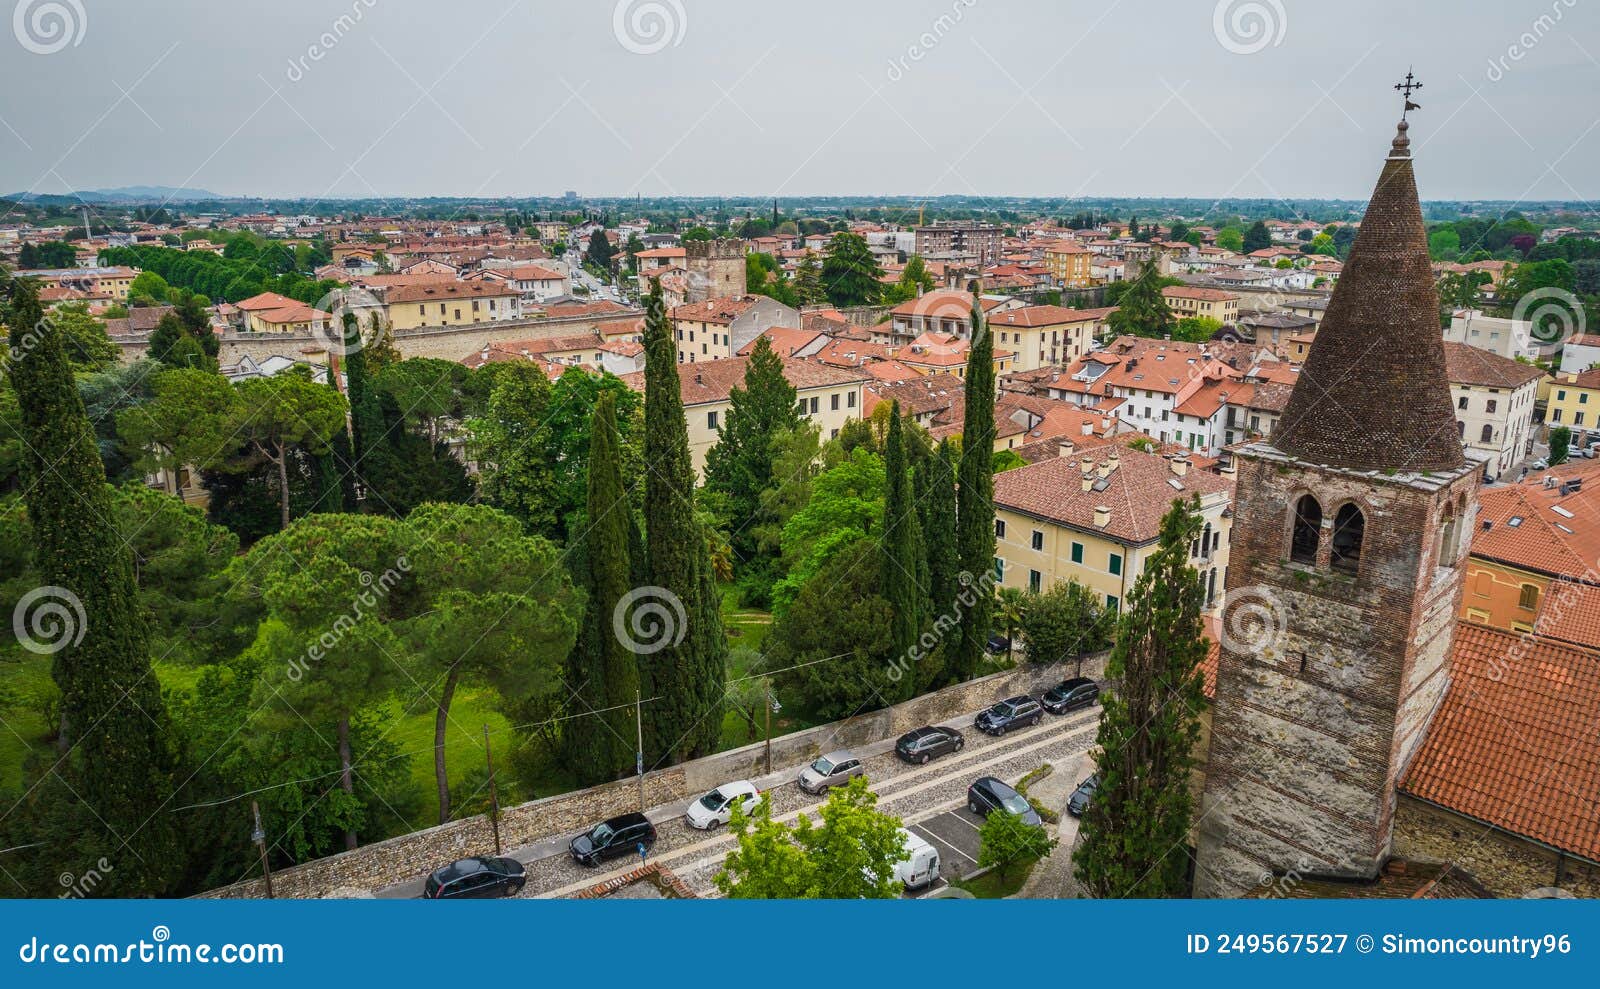 aerial view of marostica with sant'antonio abate church bell tower, vicenza, veneto, italy, europe